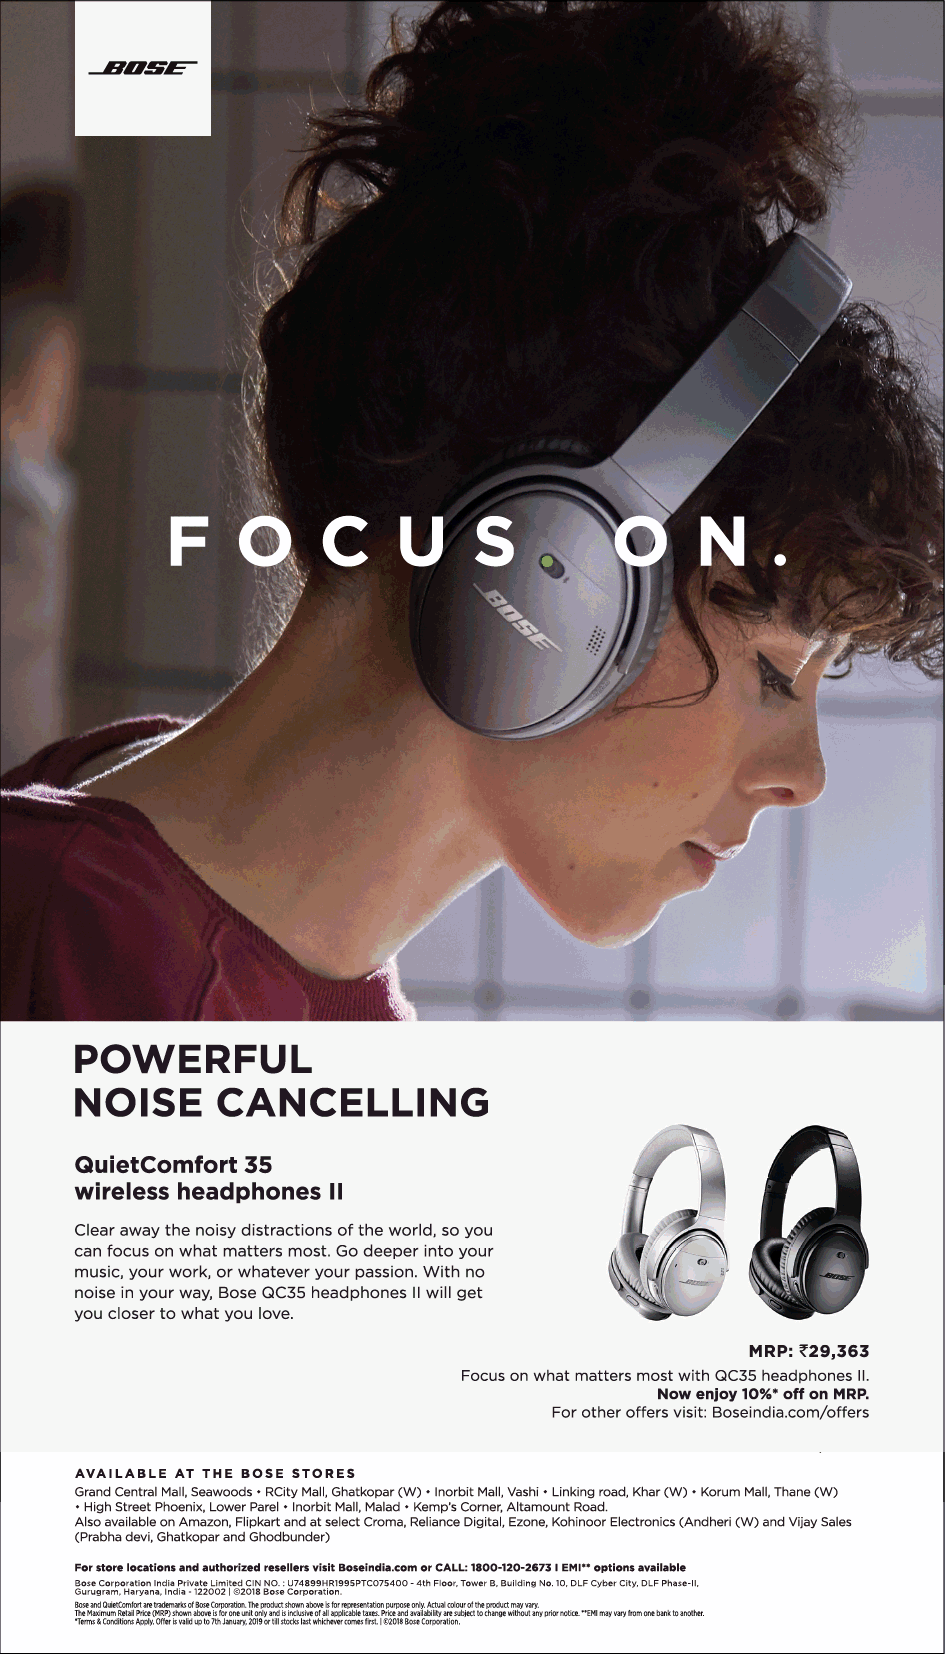 bose-headphones-powerful-noise-cancelling-ad-bombay-times-29-12-2018.png